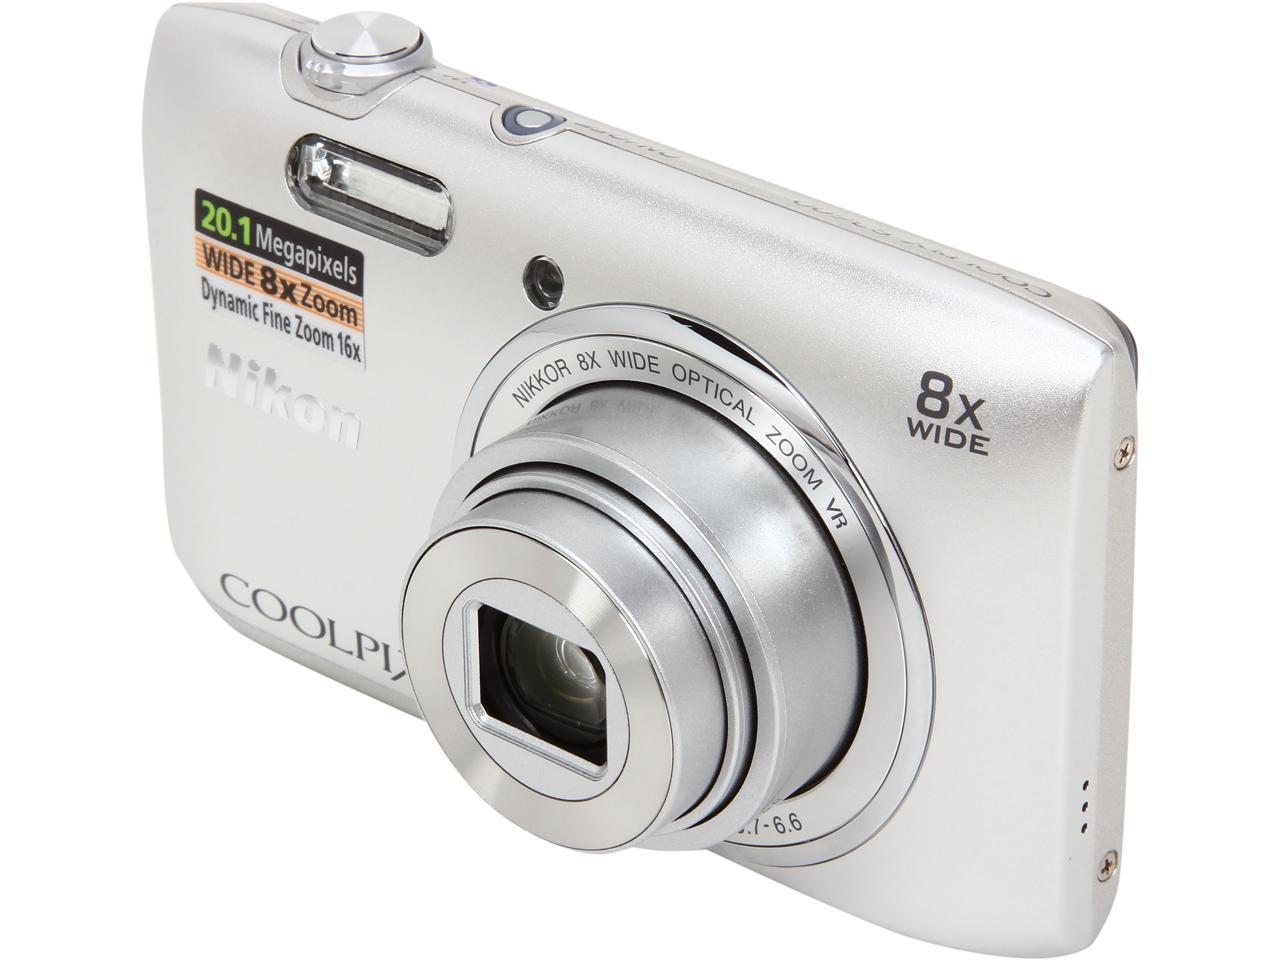 Nikon COOLPIX S3600 Silver 20.1 MP 25mm Wide Angle Digital 